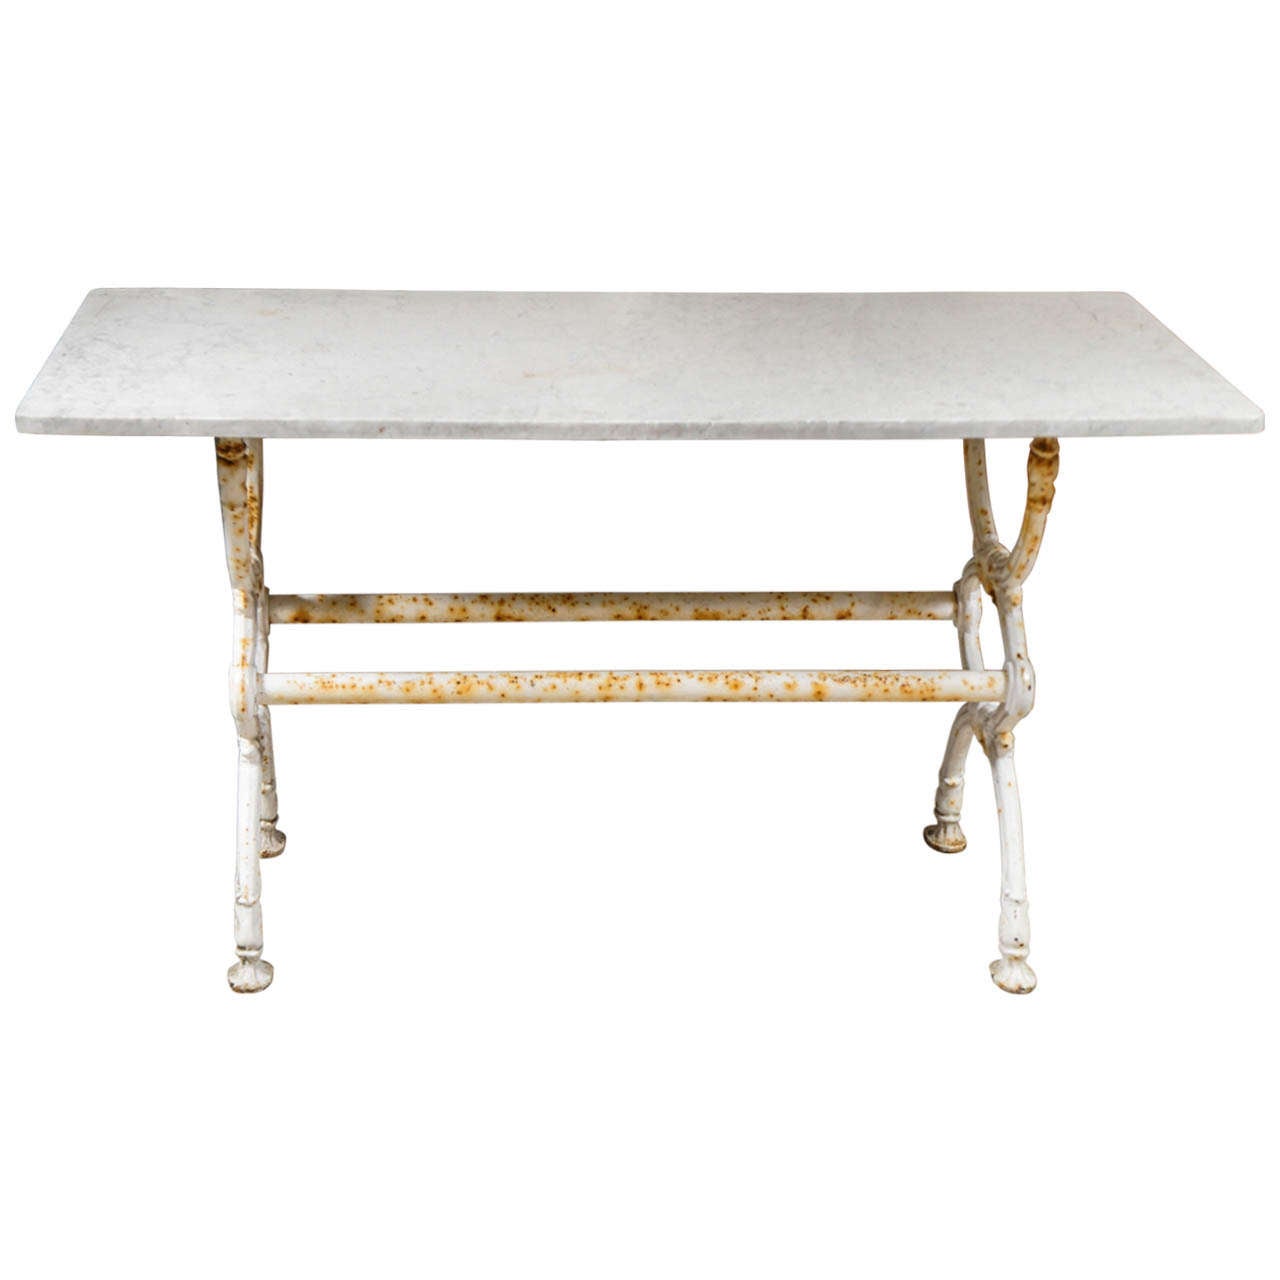 Late 19th-Early 20th Century Cast Iron Garden Table